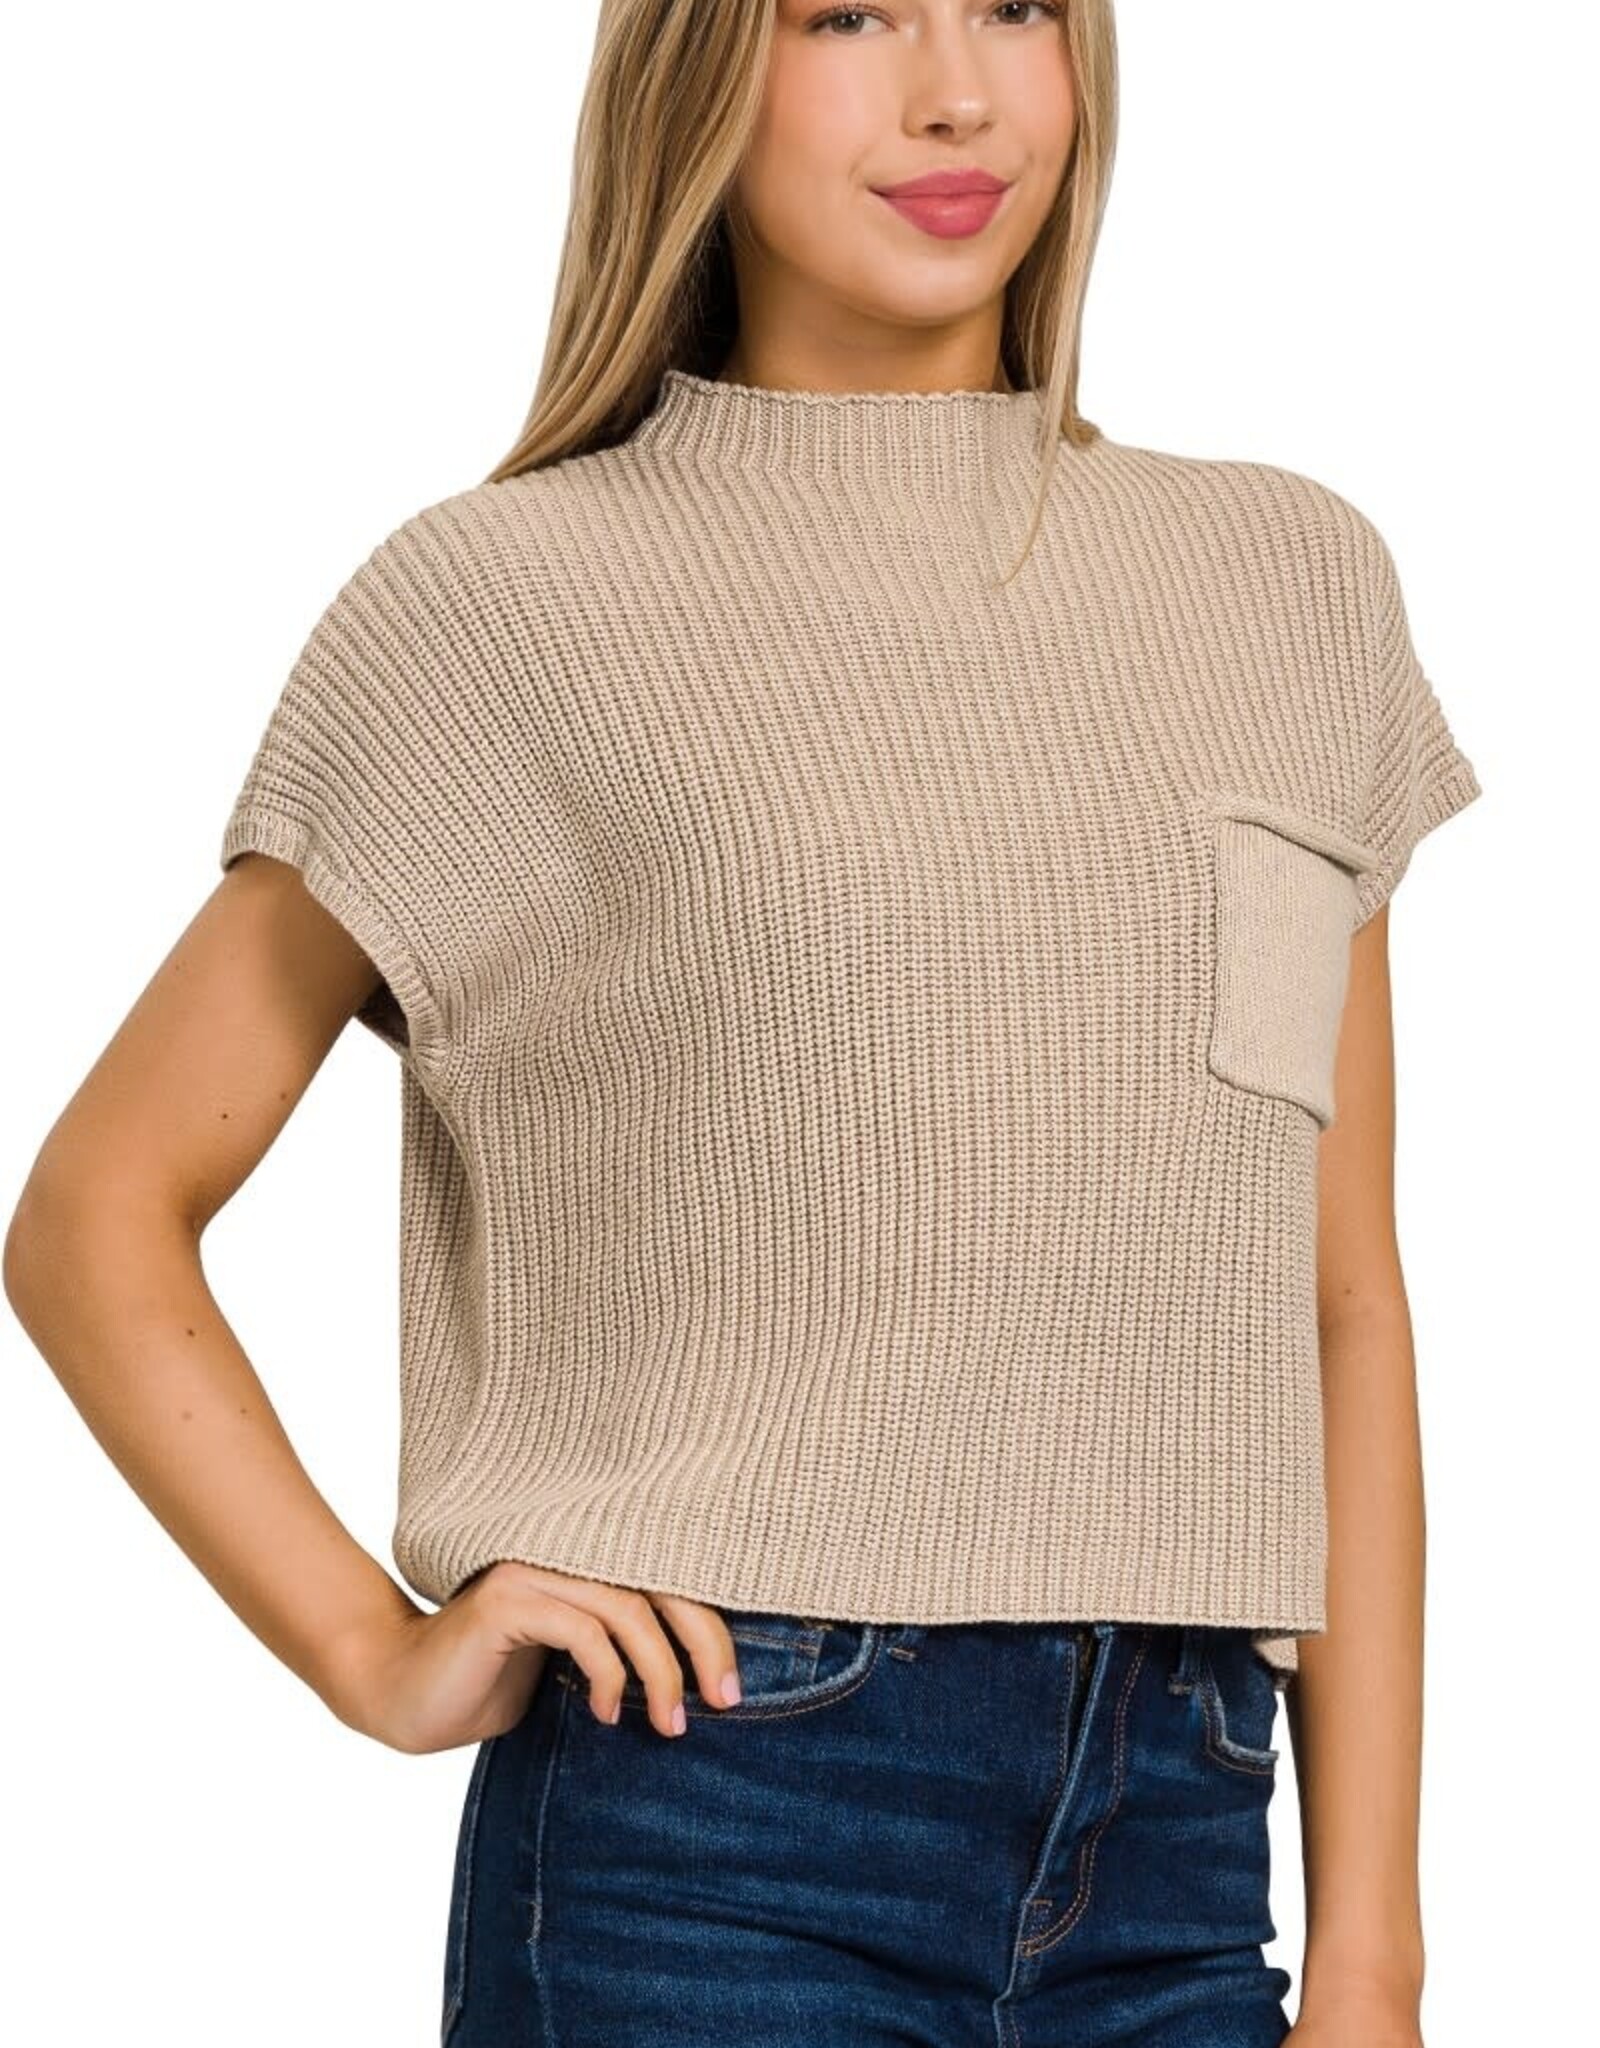 Miss Bliss Mock Neck Short Sleeve Cropped Sweater